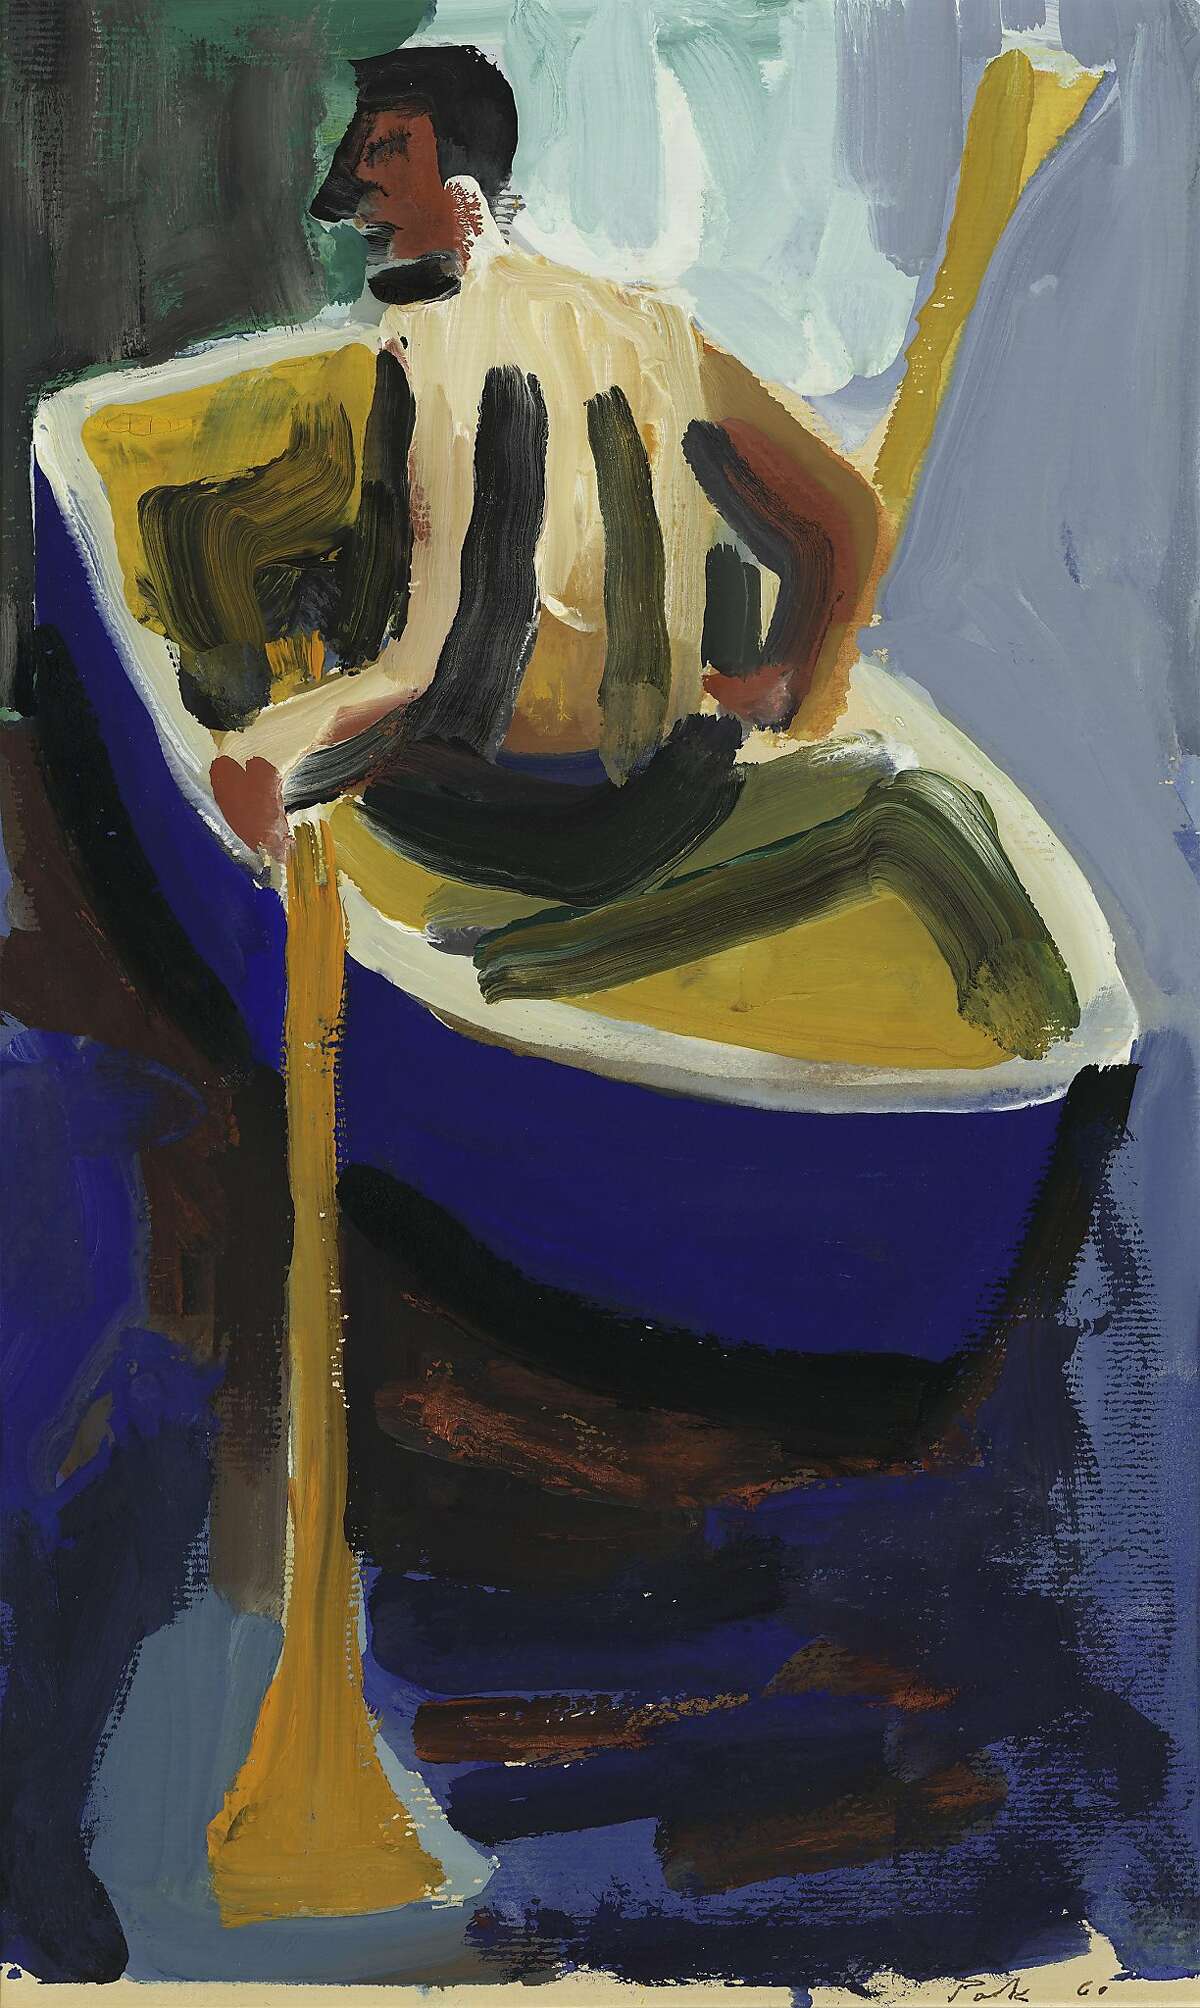 David Park's 1960 gouache on paper work "Man in Rowboat" is on display in "David Park: Personal Perspectives" through May 22 at Richmond Art Center.